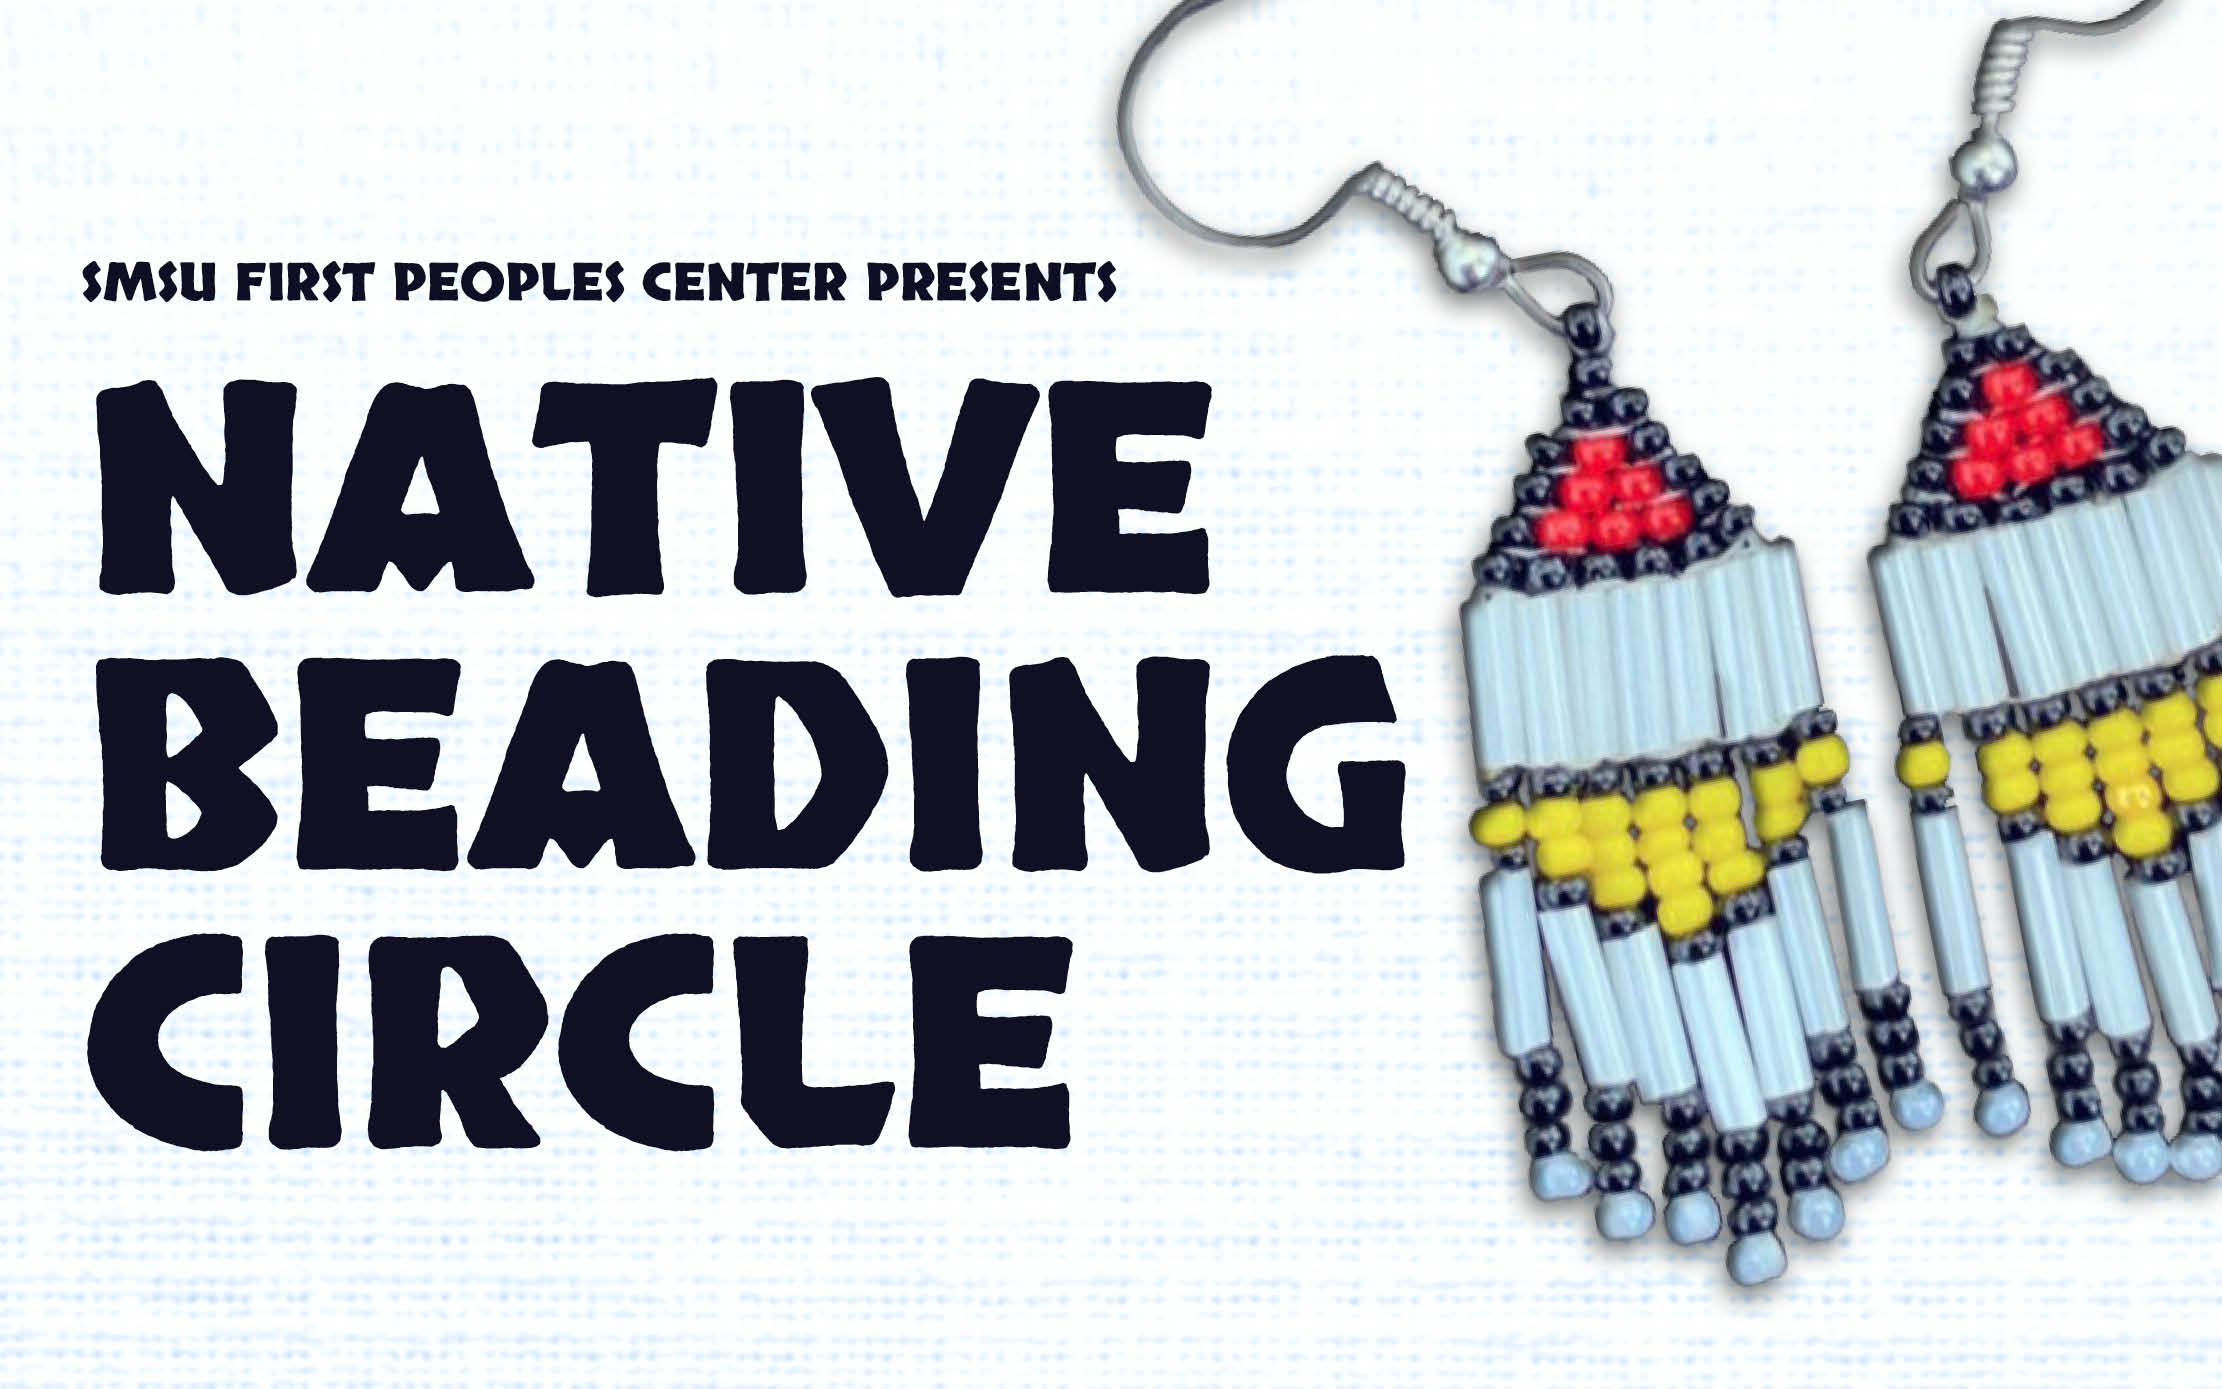 SMSU First Peoples Center presents Native Beading Circle